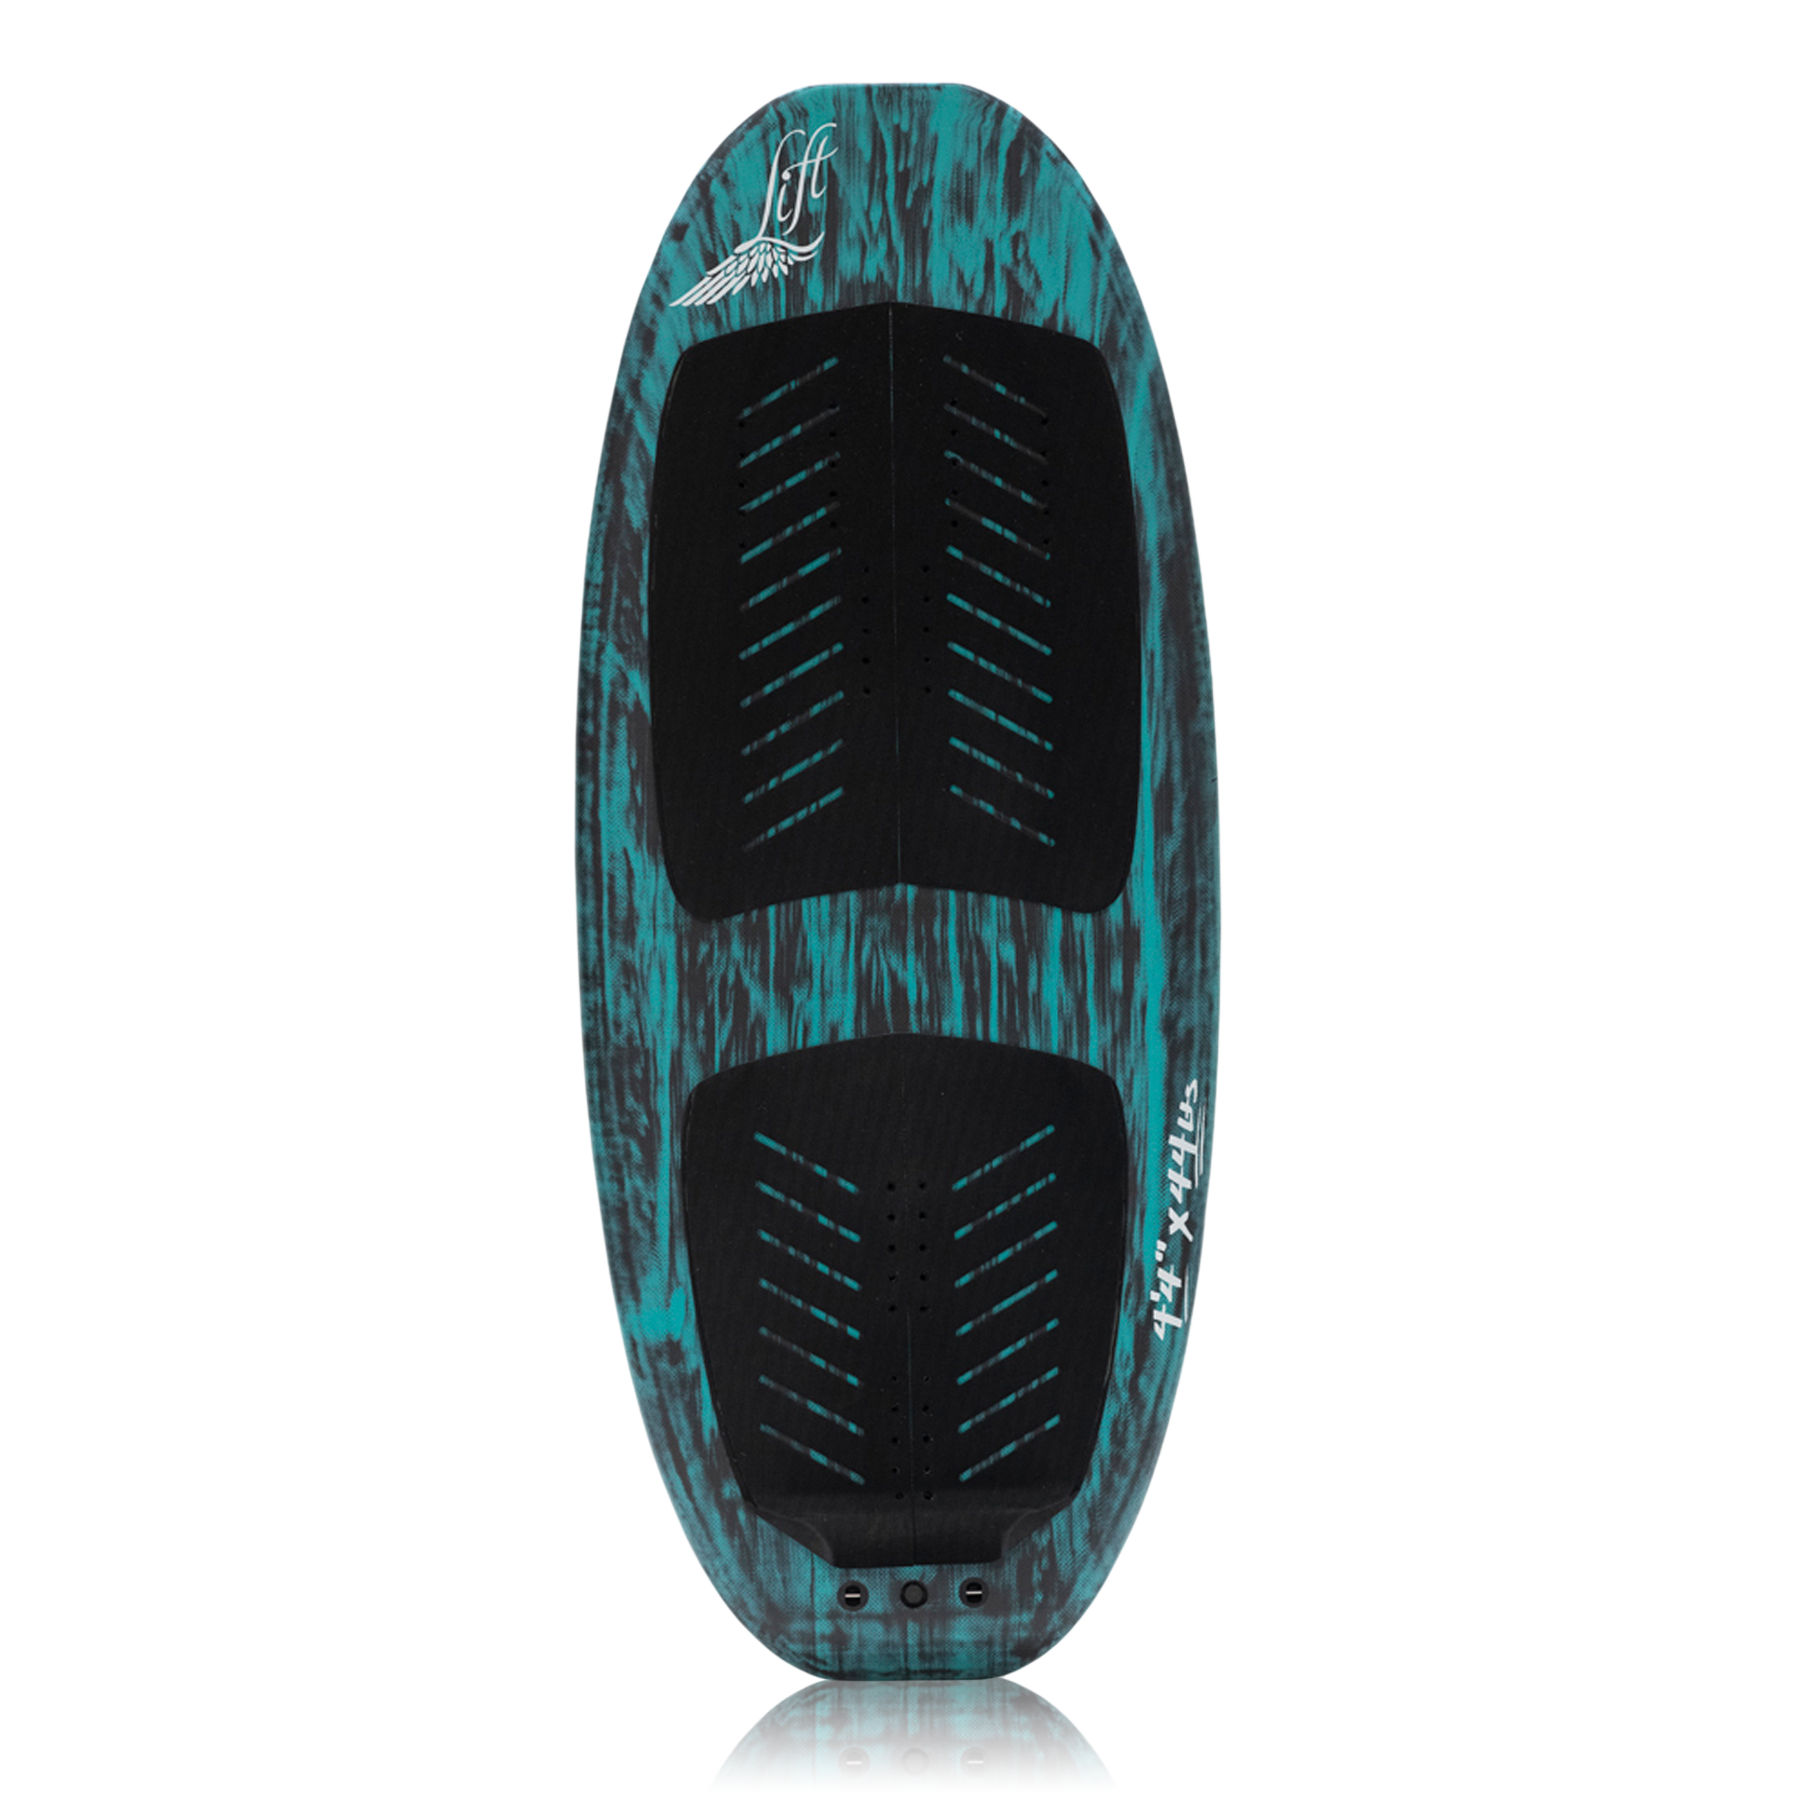 TURQUOISE WING FOIL BOARD - 4'4